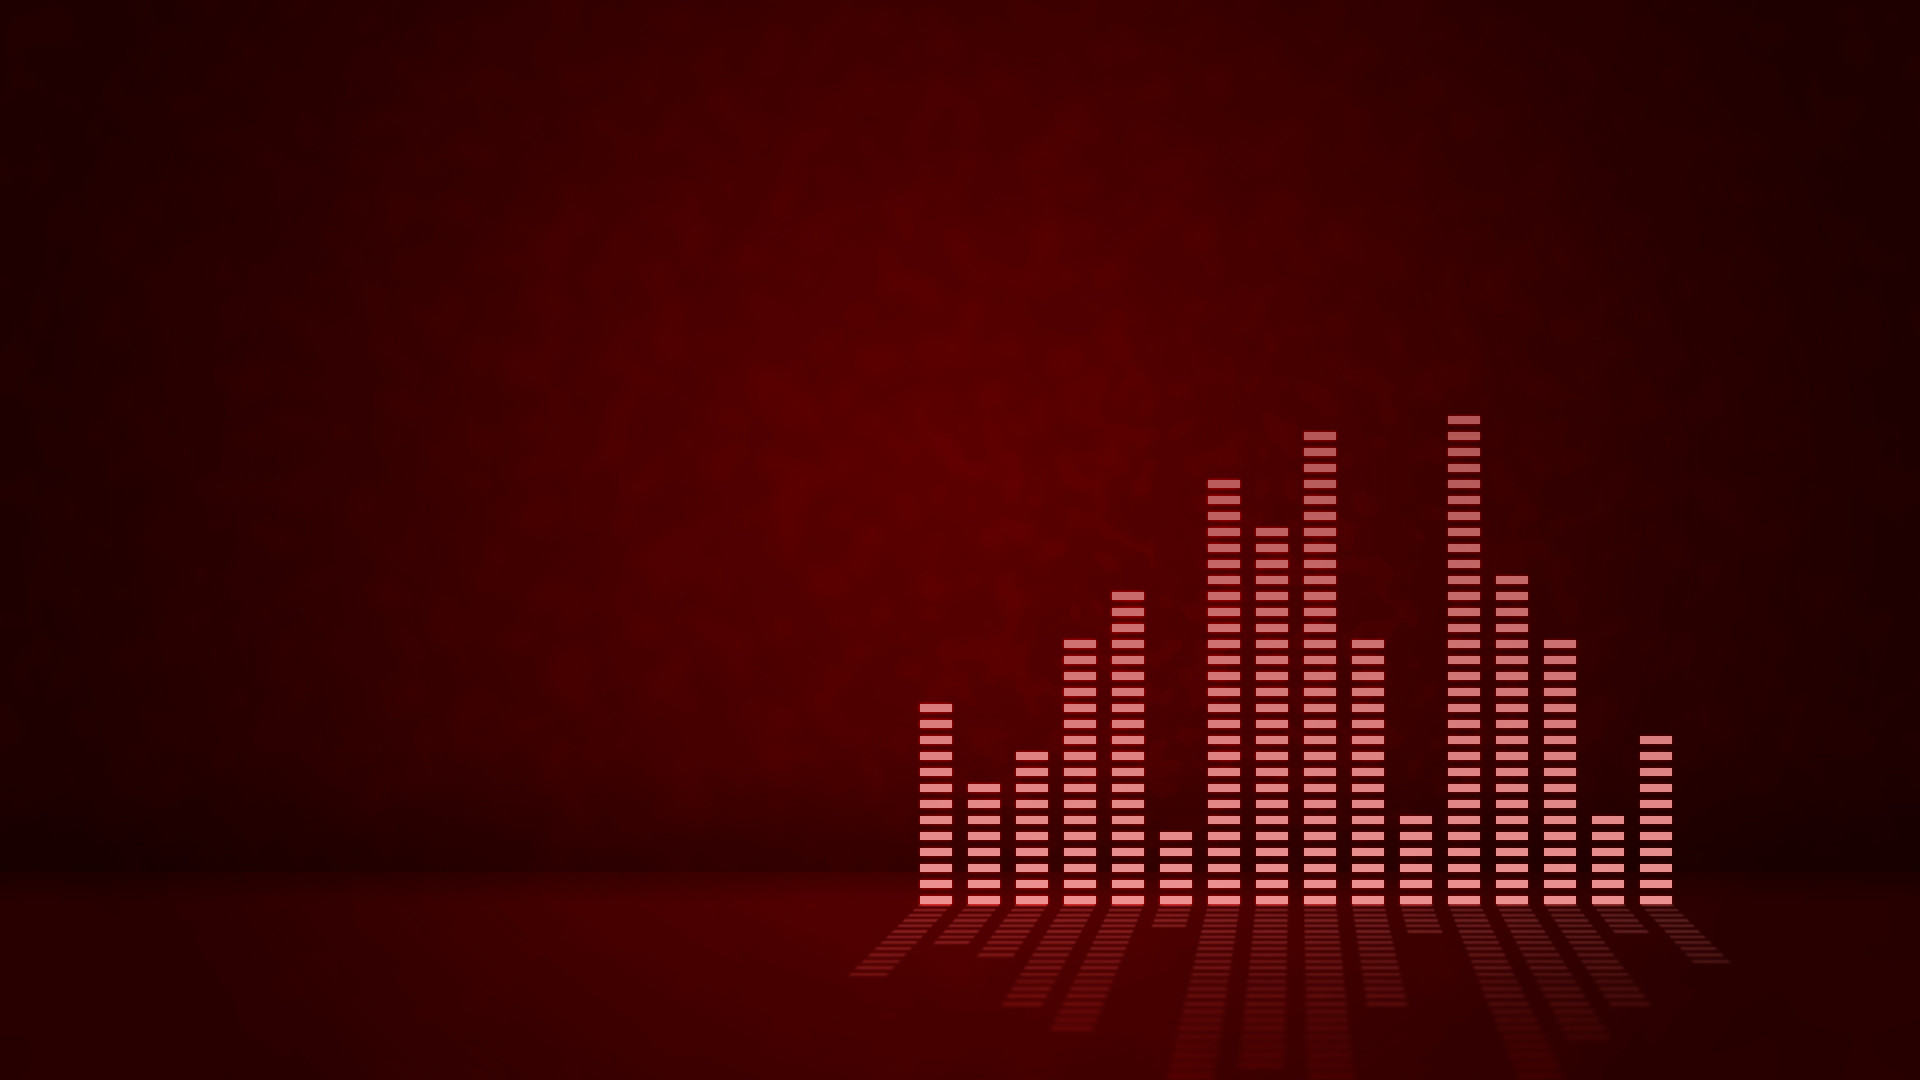 1920x1080 Equalizer music wallpaper hd resolution music bars wallpapers 